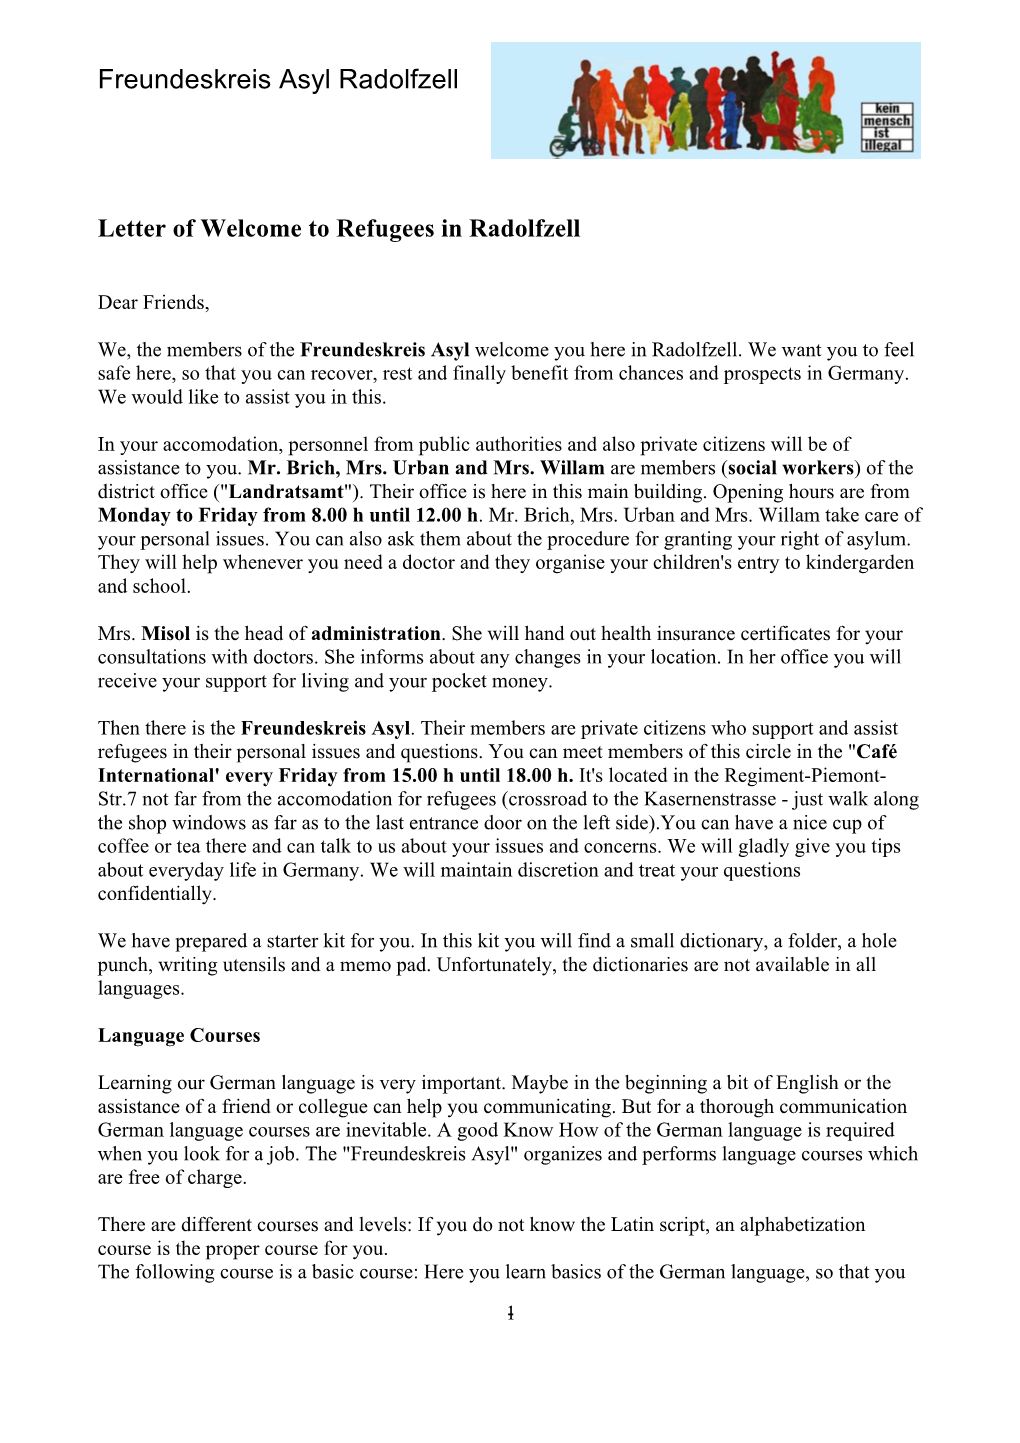 Letter of Welcome to Refugees in Radolfzell